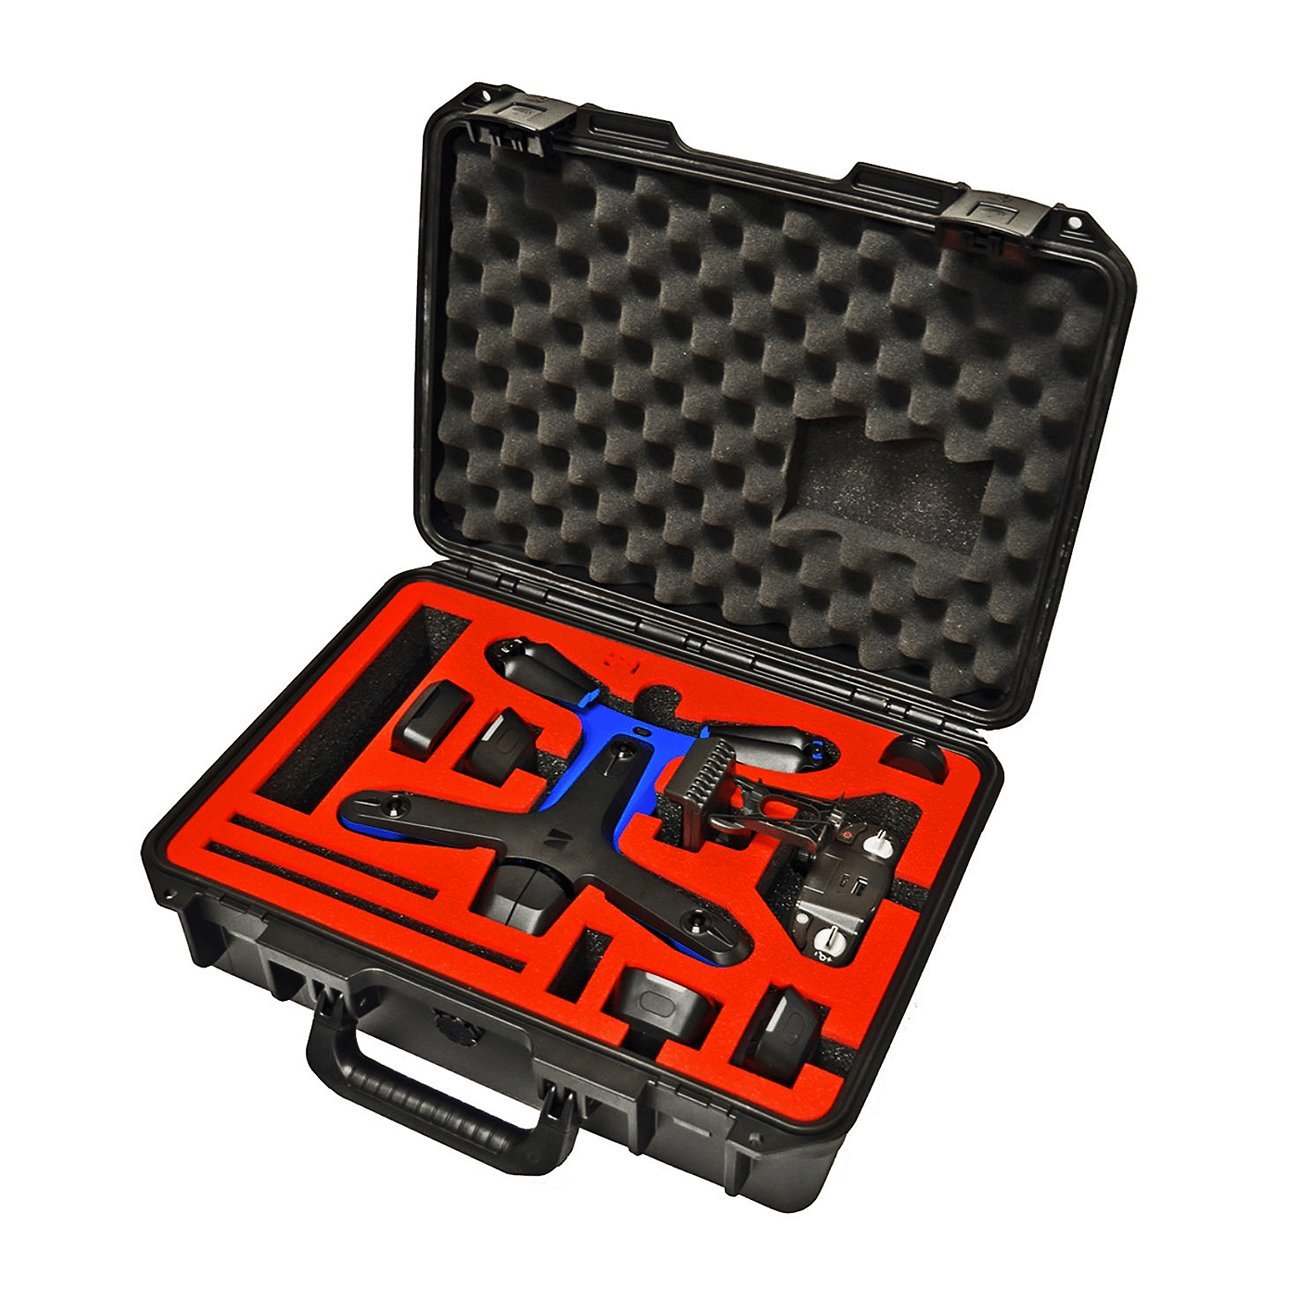 Skydio 2 Drone with Pro Kit Case - Drone Hangar